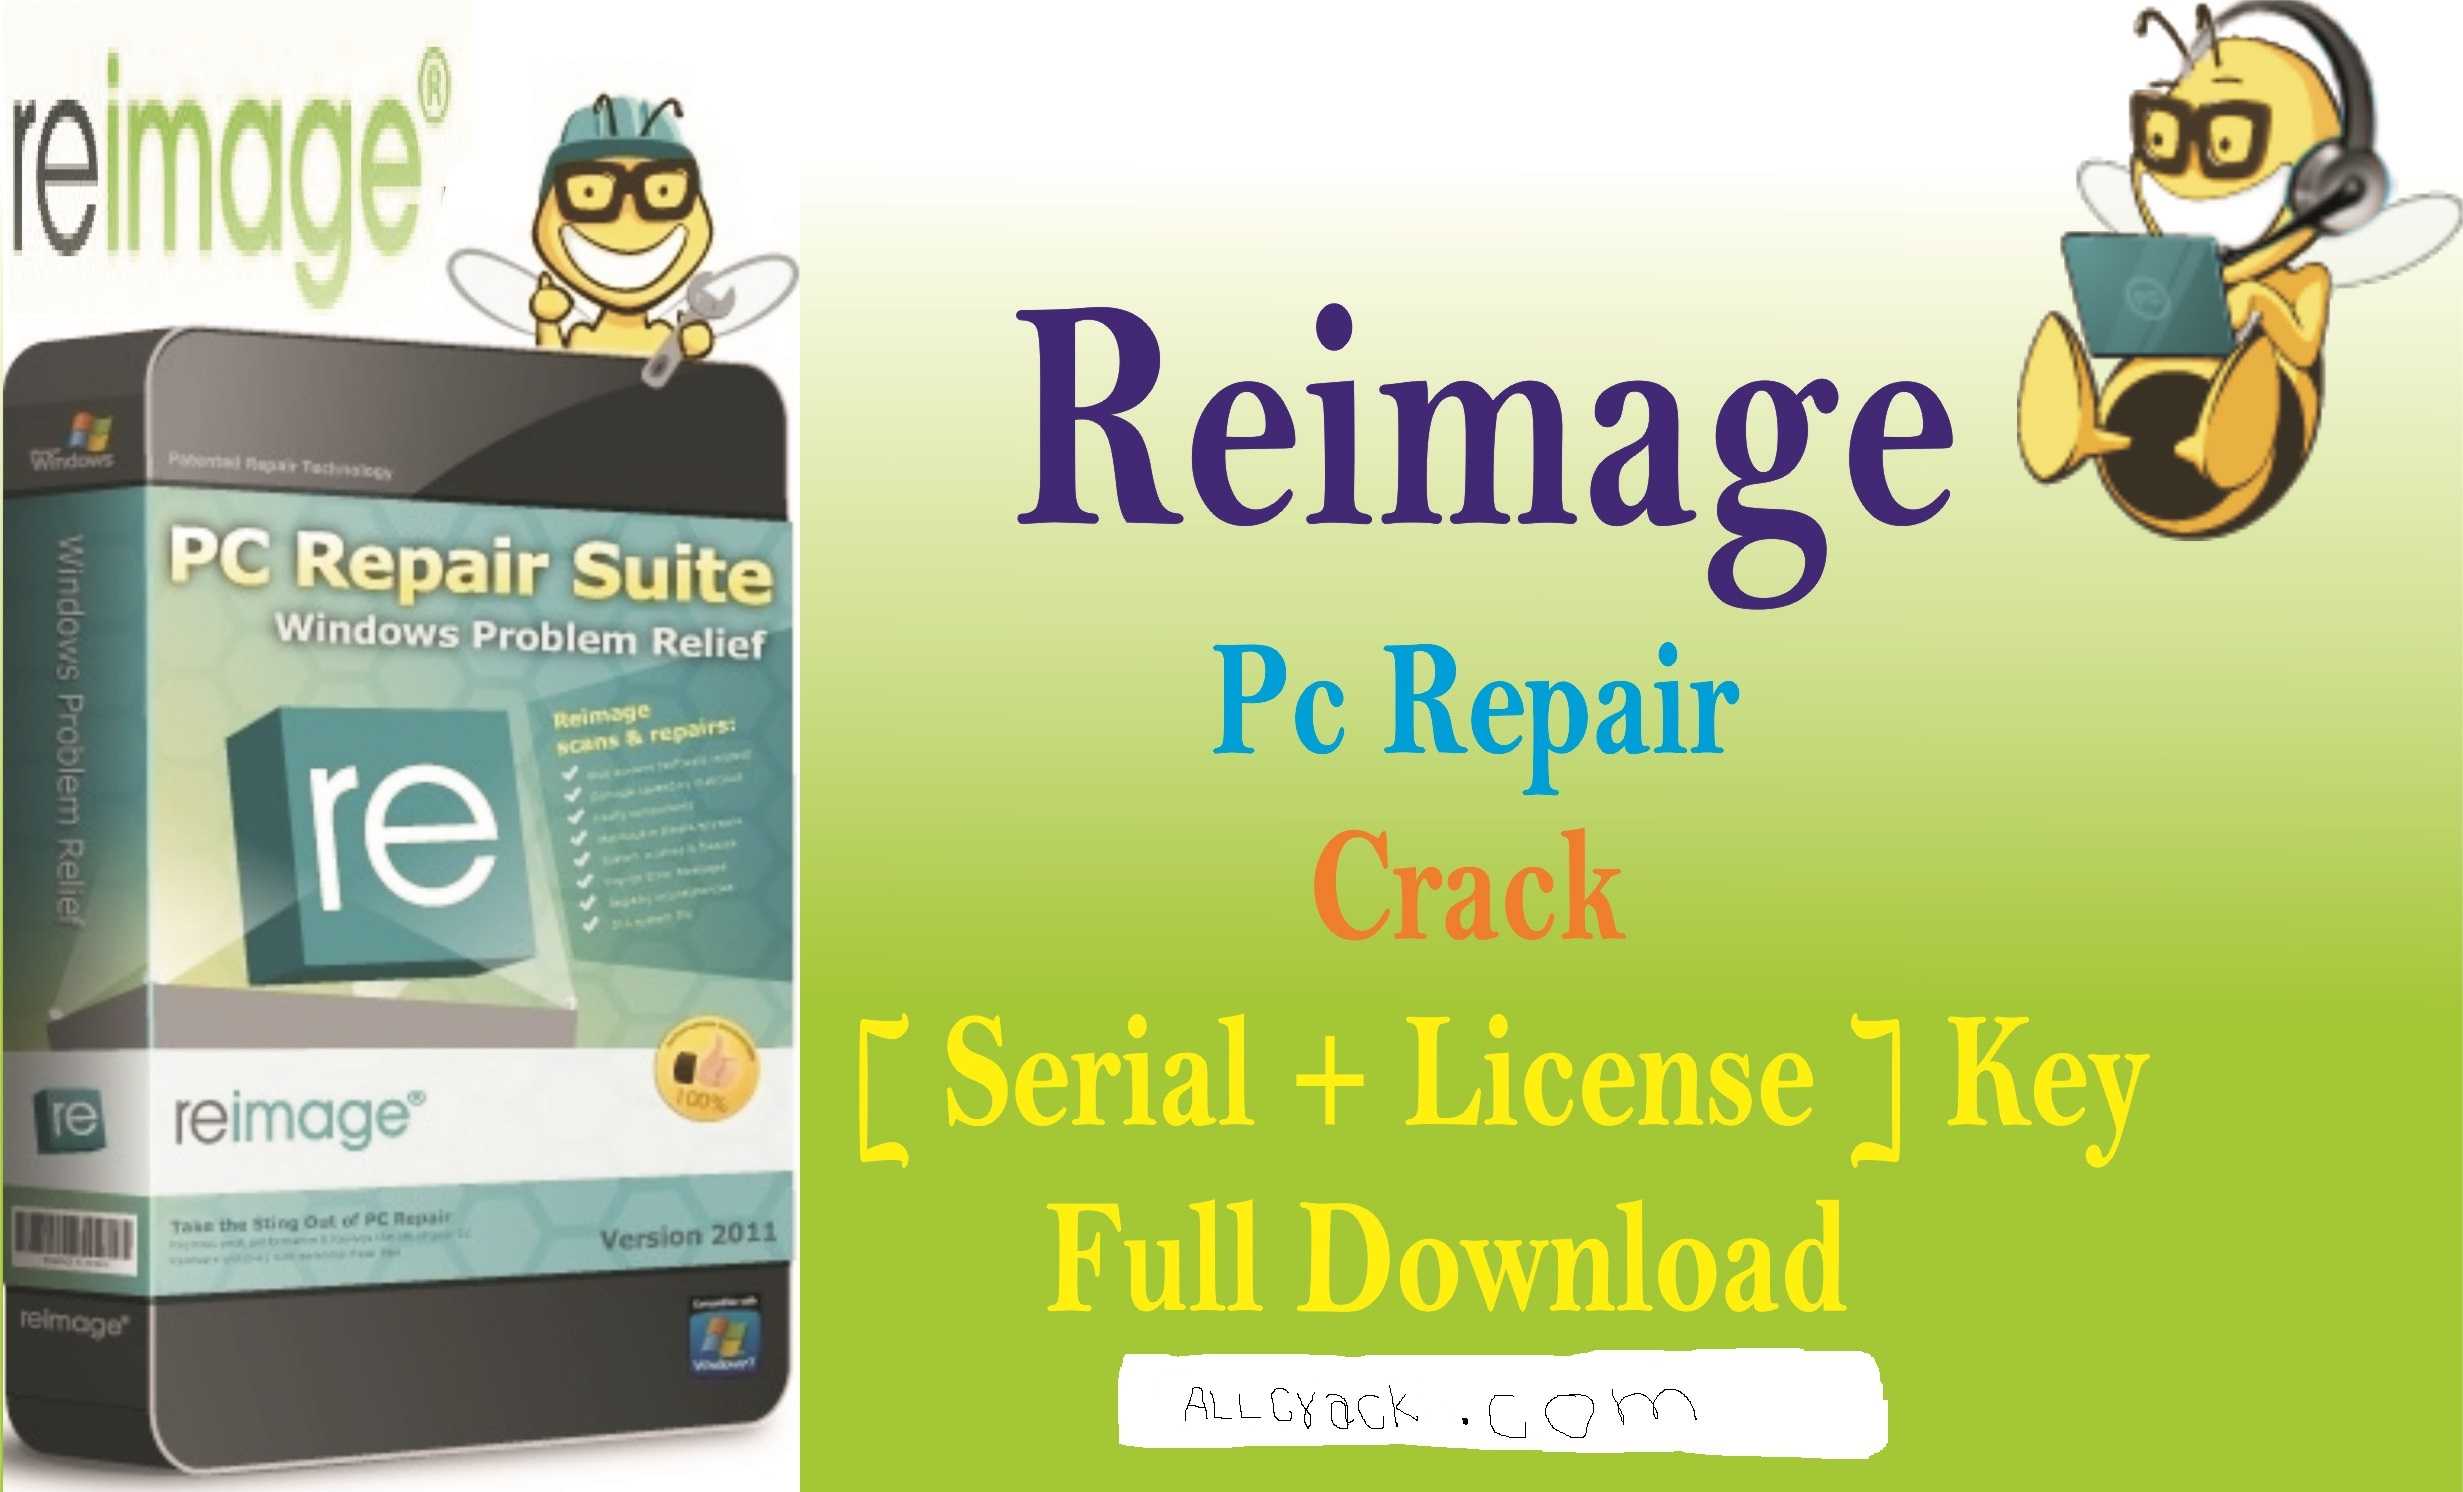 Reimage repair virus. is it a real threat or a hoax? 2022 update